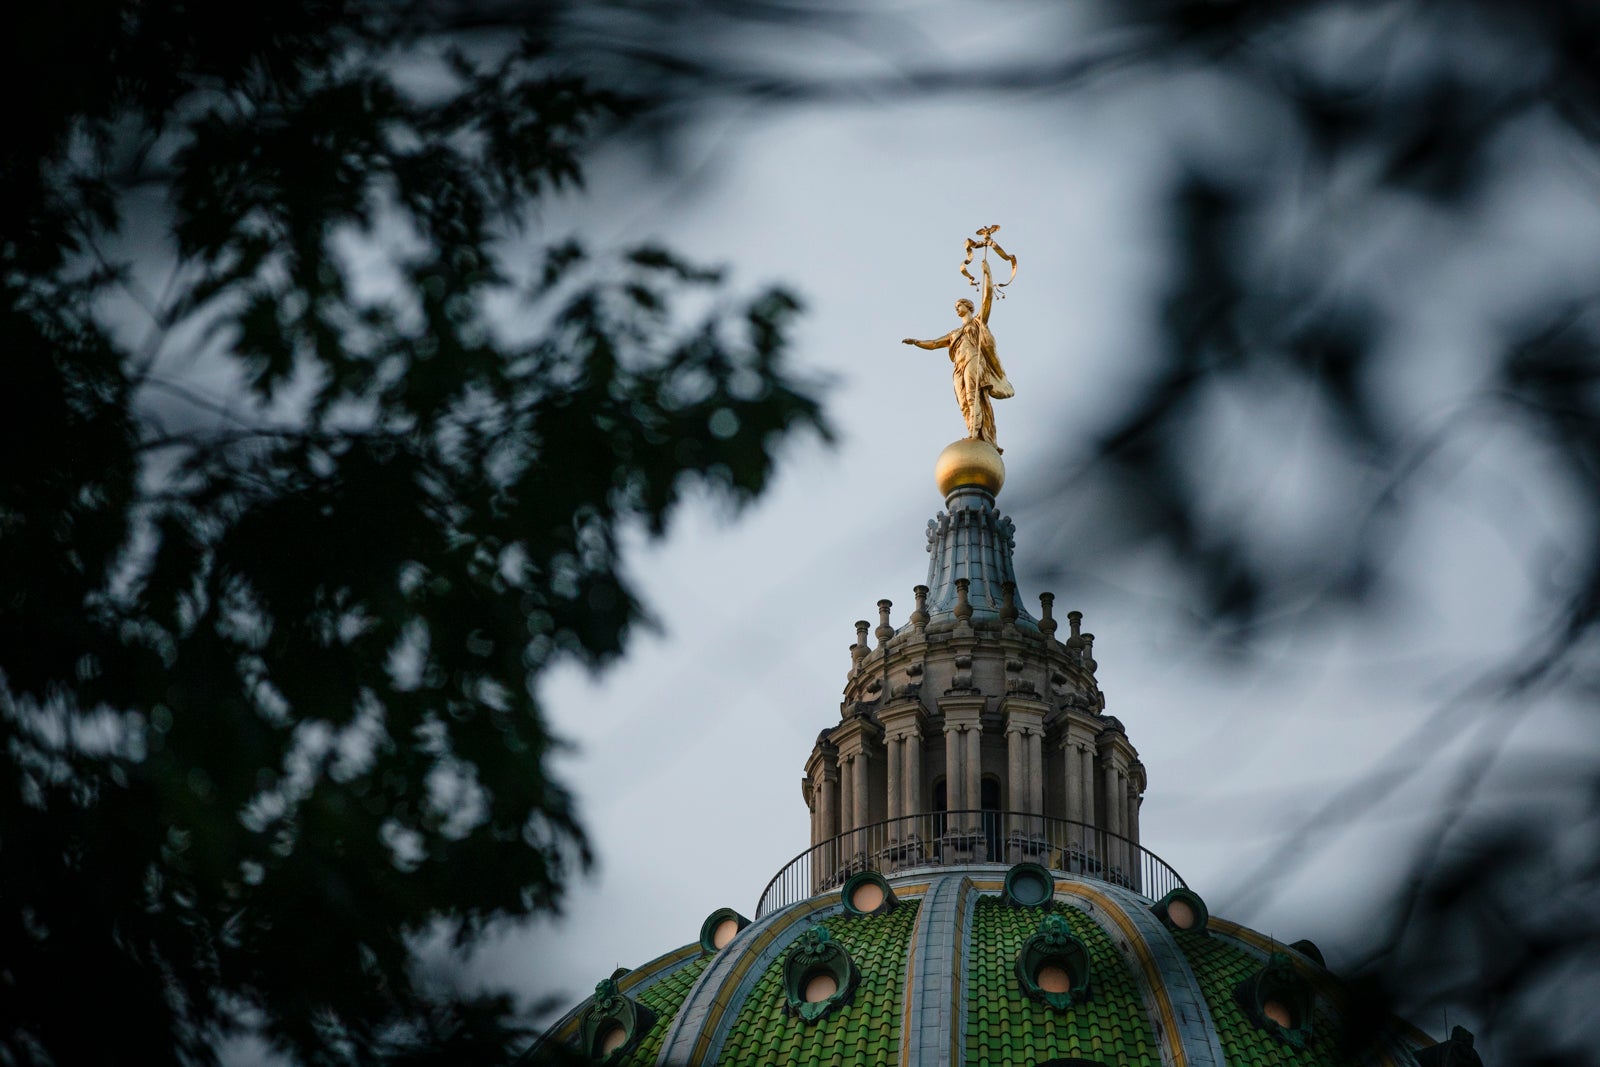 A group of Pa. lawmakers didn’t take pay during the budget impasse. A bill would force all to abstain